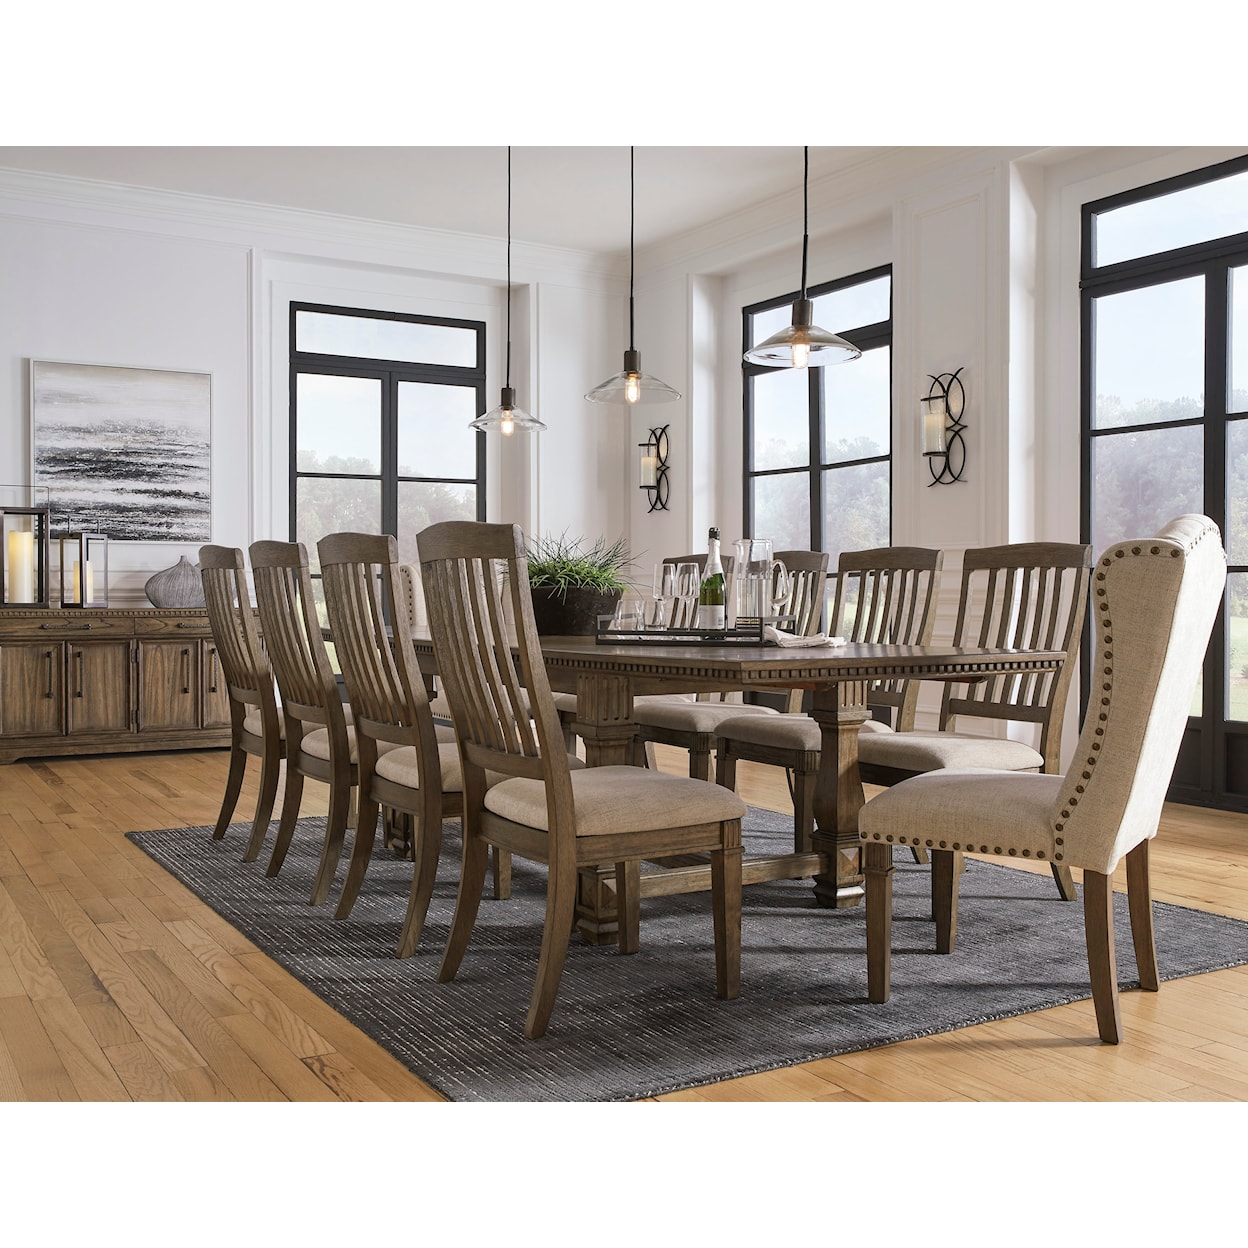 Michael Alan Select Markenburg Dining Extension Table